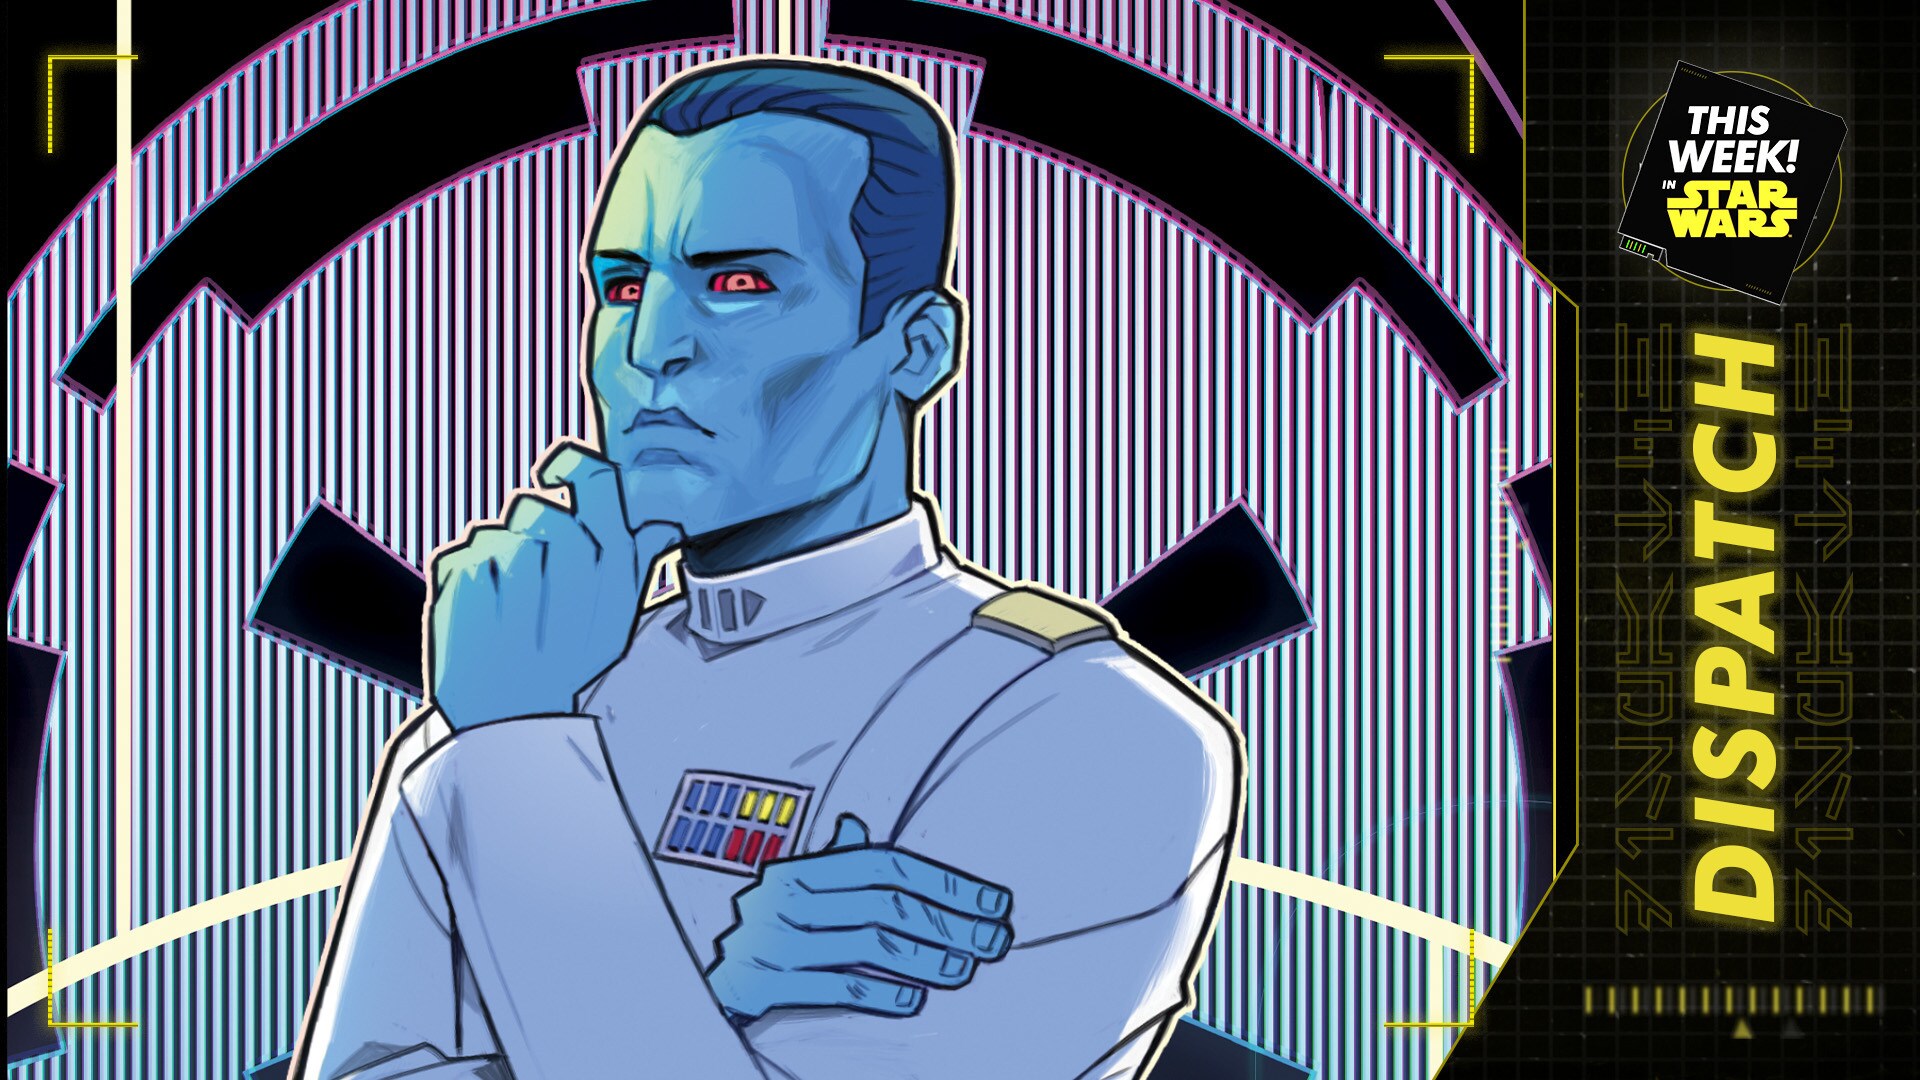 Grand Admiral Thrawn Marvel Comics Variant Cover | This Week! in Star Wars Dispatch thumbnail